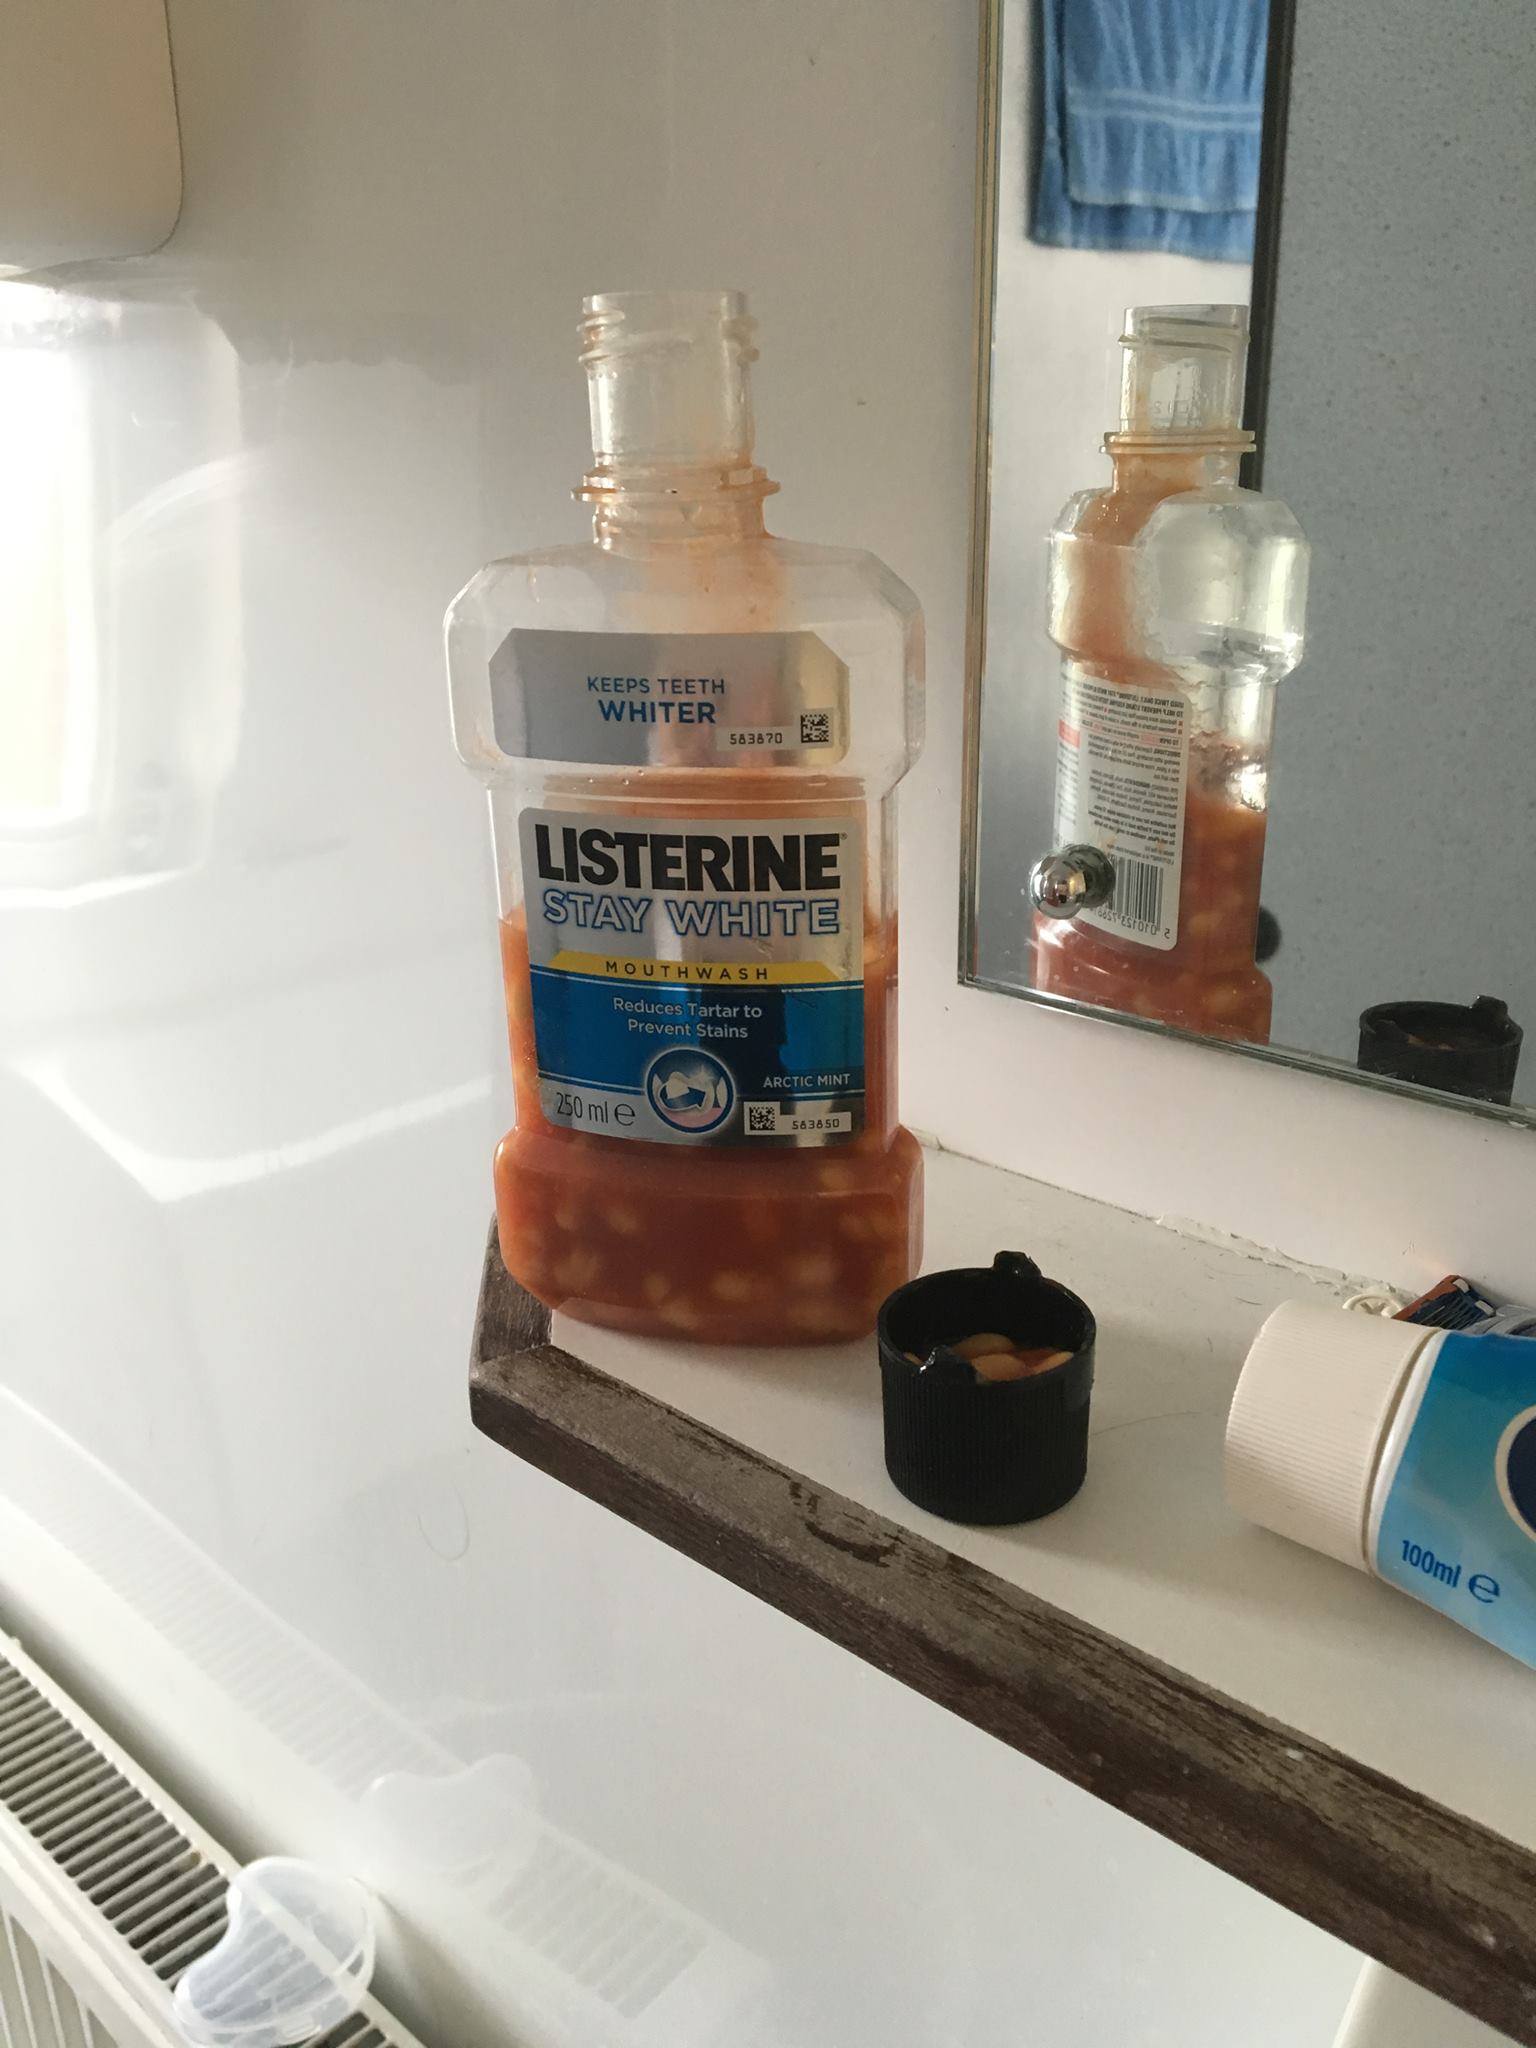 cursed image - beans in places they shouldn t - Keeps Teeth Whiter 583870 Listerine Stay White Os Stor 2 Mouth Wash Reduces Tartar to Prevent Stains Arctic Mint 250mle 583850 100ml e